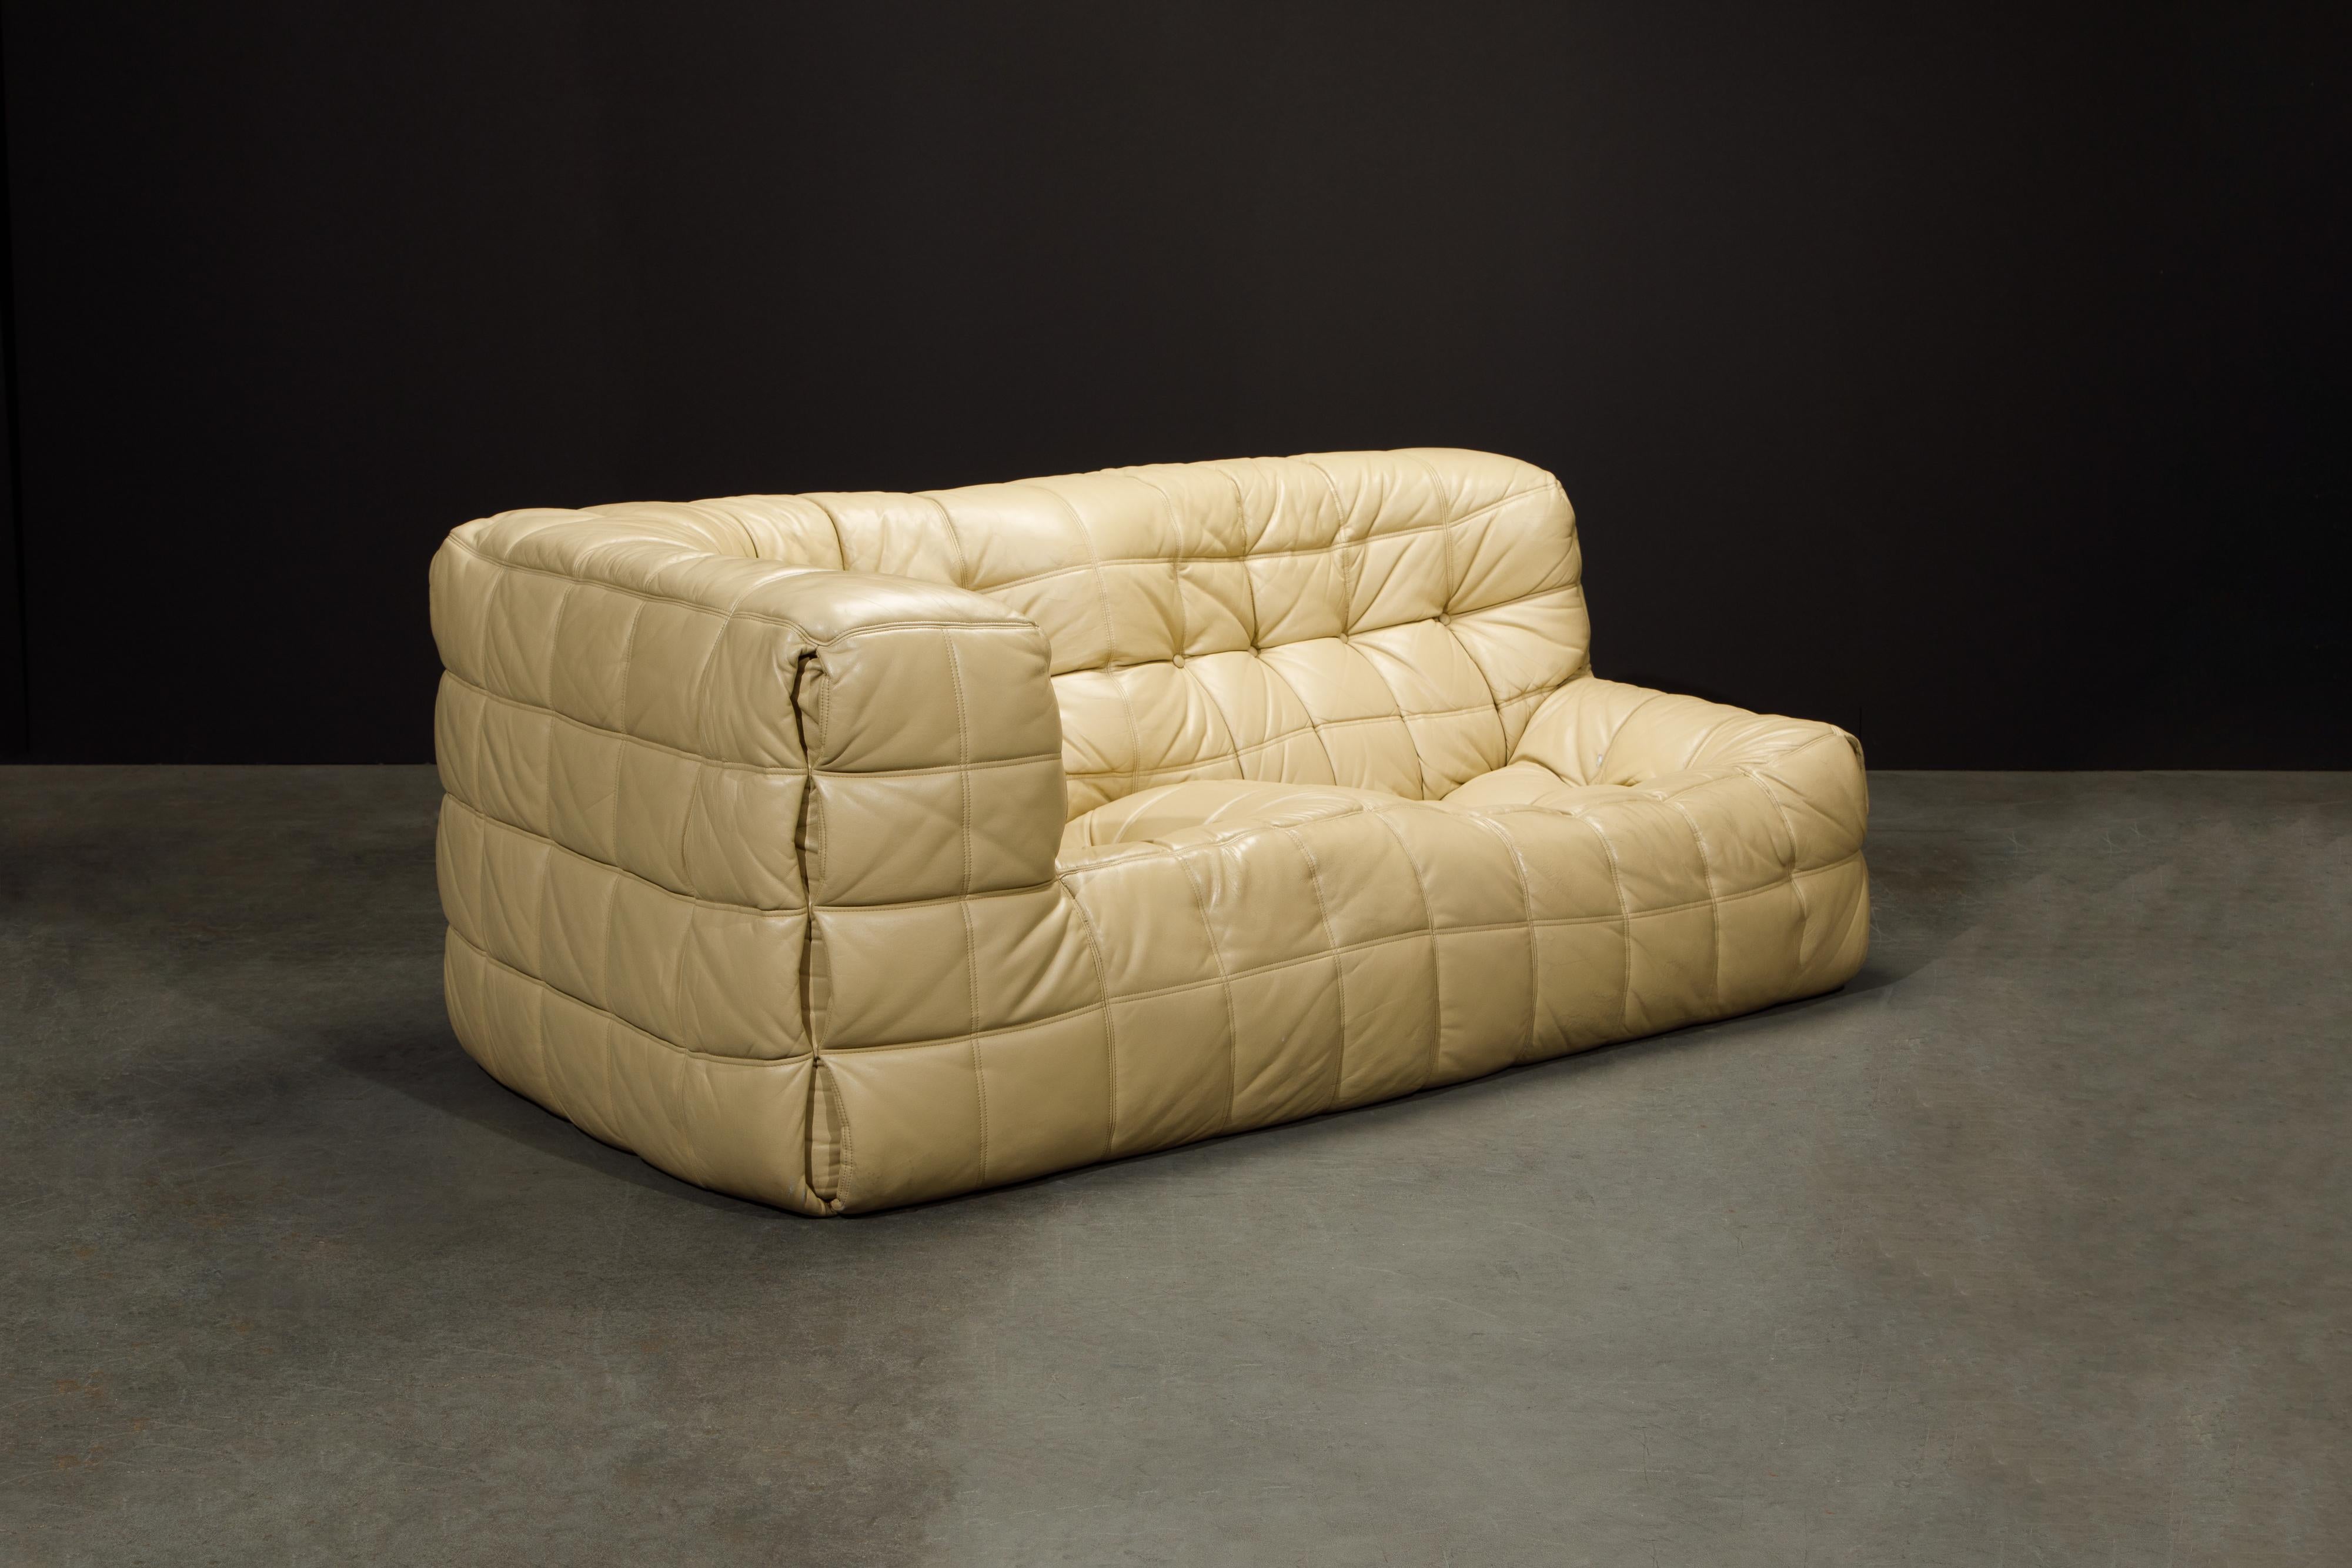 Late 20th Century 'Kashima' Leather Sectional by Michel Ducaroy for Ligne Roset, c. 1976, Signed